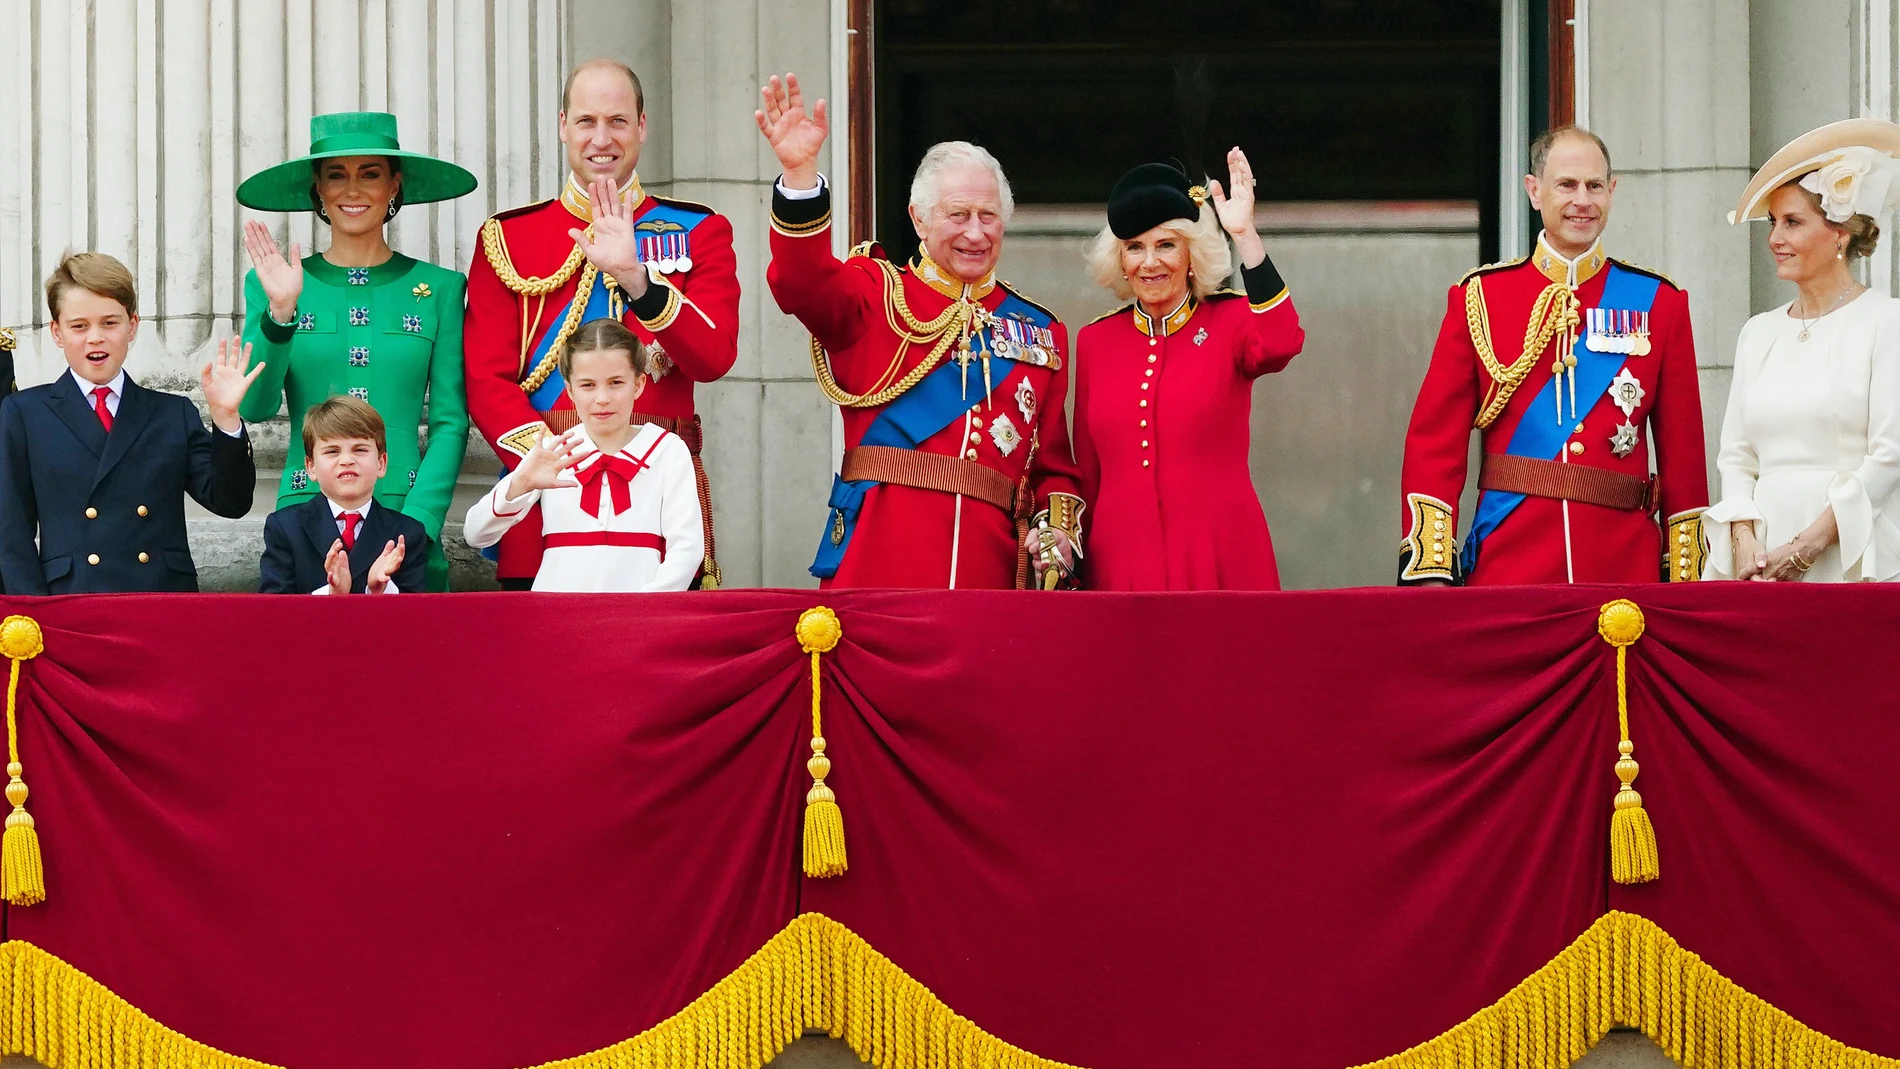 United Kingdom, London: (L-R) Prince George, Prince Louis, Kate, Princess of Wales, William, Prince of Wales, Princess Charlotte, King Charles III of Great Britain, Queen Camilla of Great Britain, Prince Edward, Duke of Edinburgh and Sophie, Duchess of Edinburgh on the balcony of Buckingham Palace in London to watch the air show following the "Trooping the Colour" ceremony. For the first time since his accession to the throne, Charles has been honored with the birthday parade.